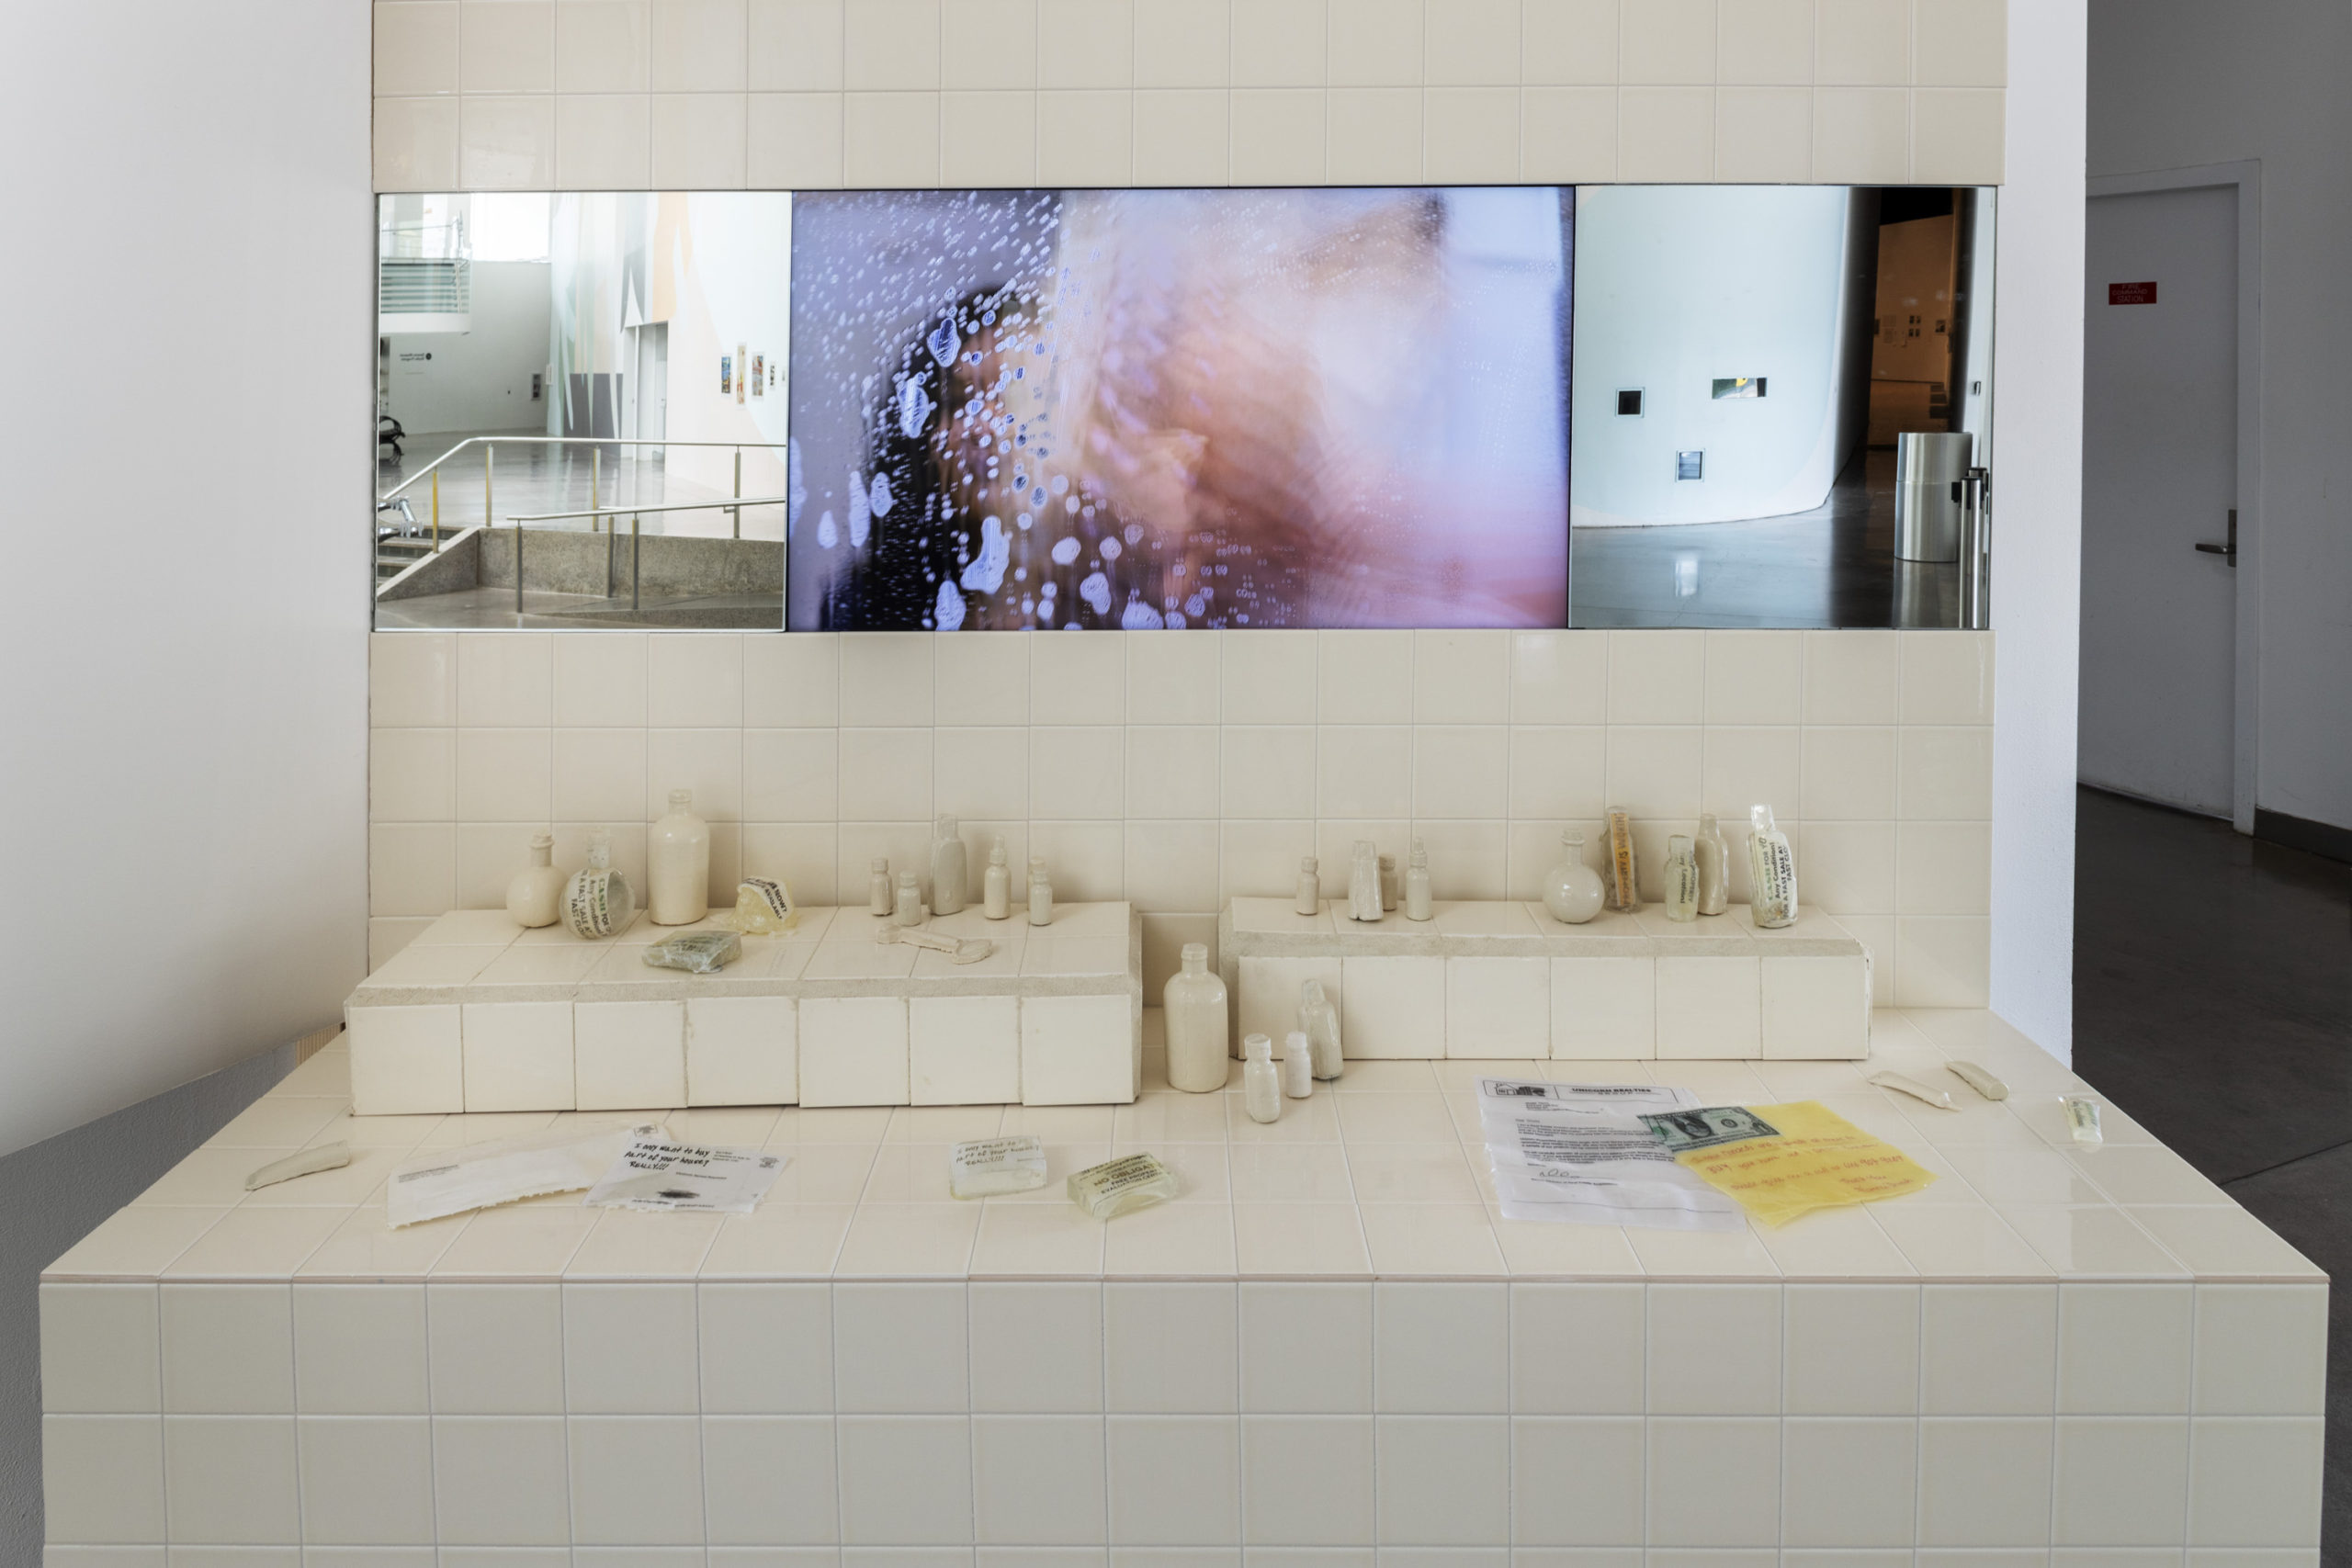 A cream colored tiled wall and counter surface installed on a white wall. On the wall is three images. The first and third are two images of bare exhibition spaces. The centered image is of a woman with a watercolor like wash distorting her likeness. On the counter are two stands made of the same cream colored tile, ceramic bathroom products, and a few pieces of paper.